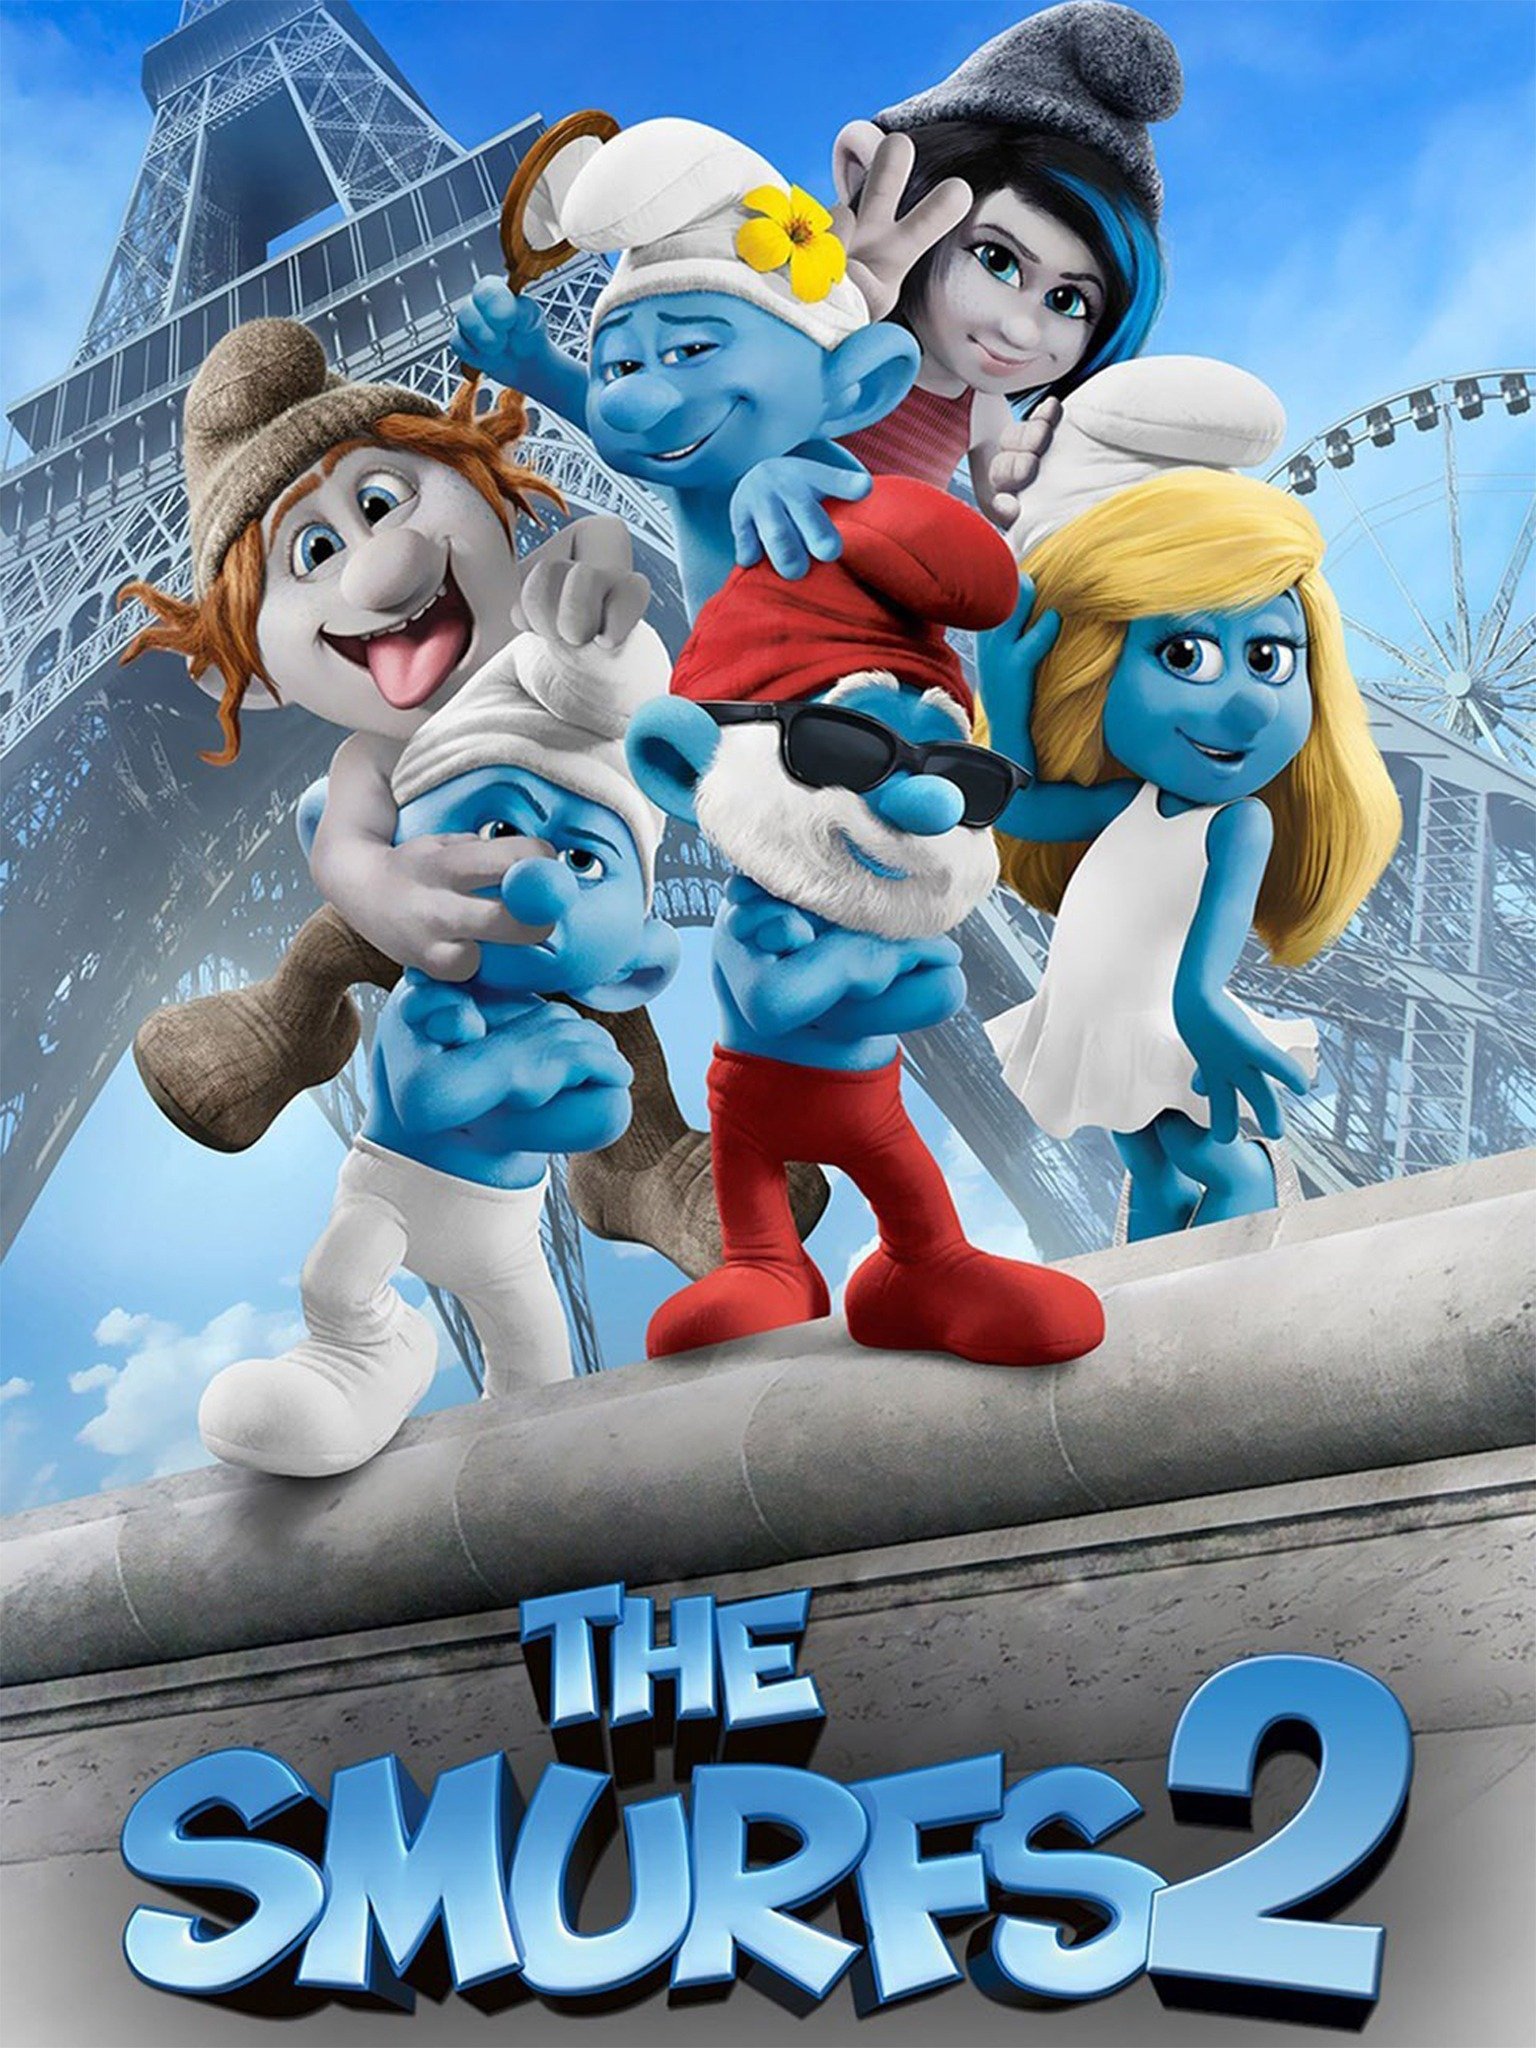 Watch The Smurfs 2 2013 Online Hd Full Movies